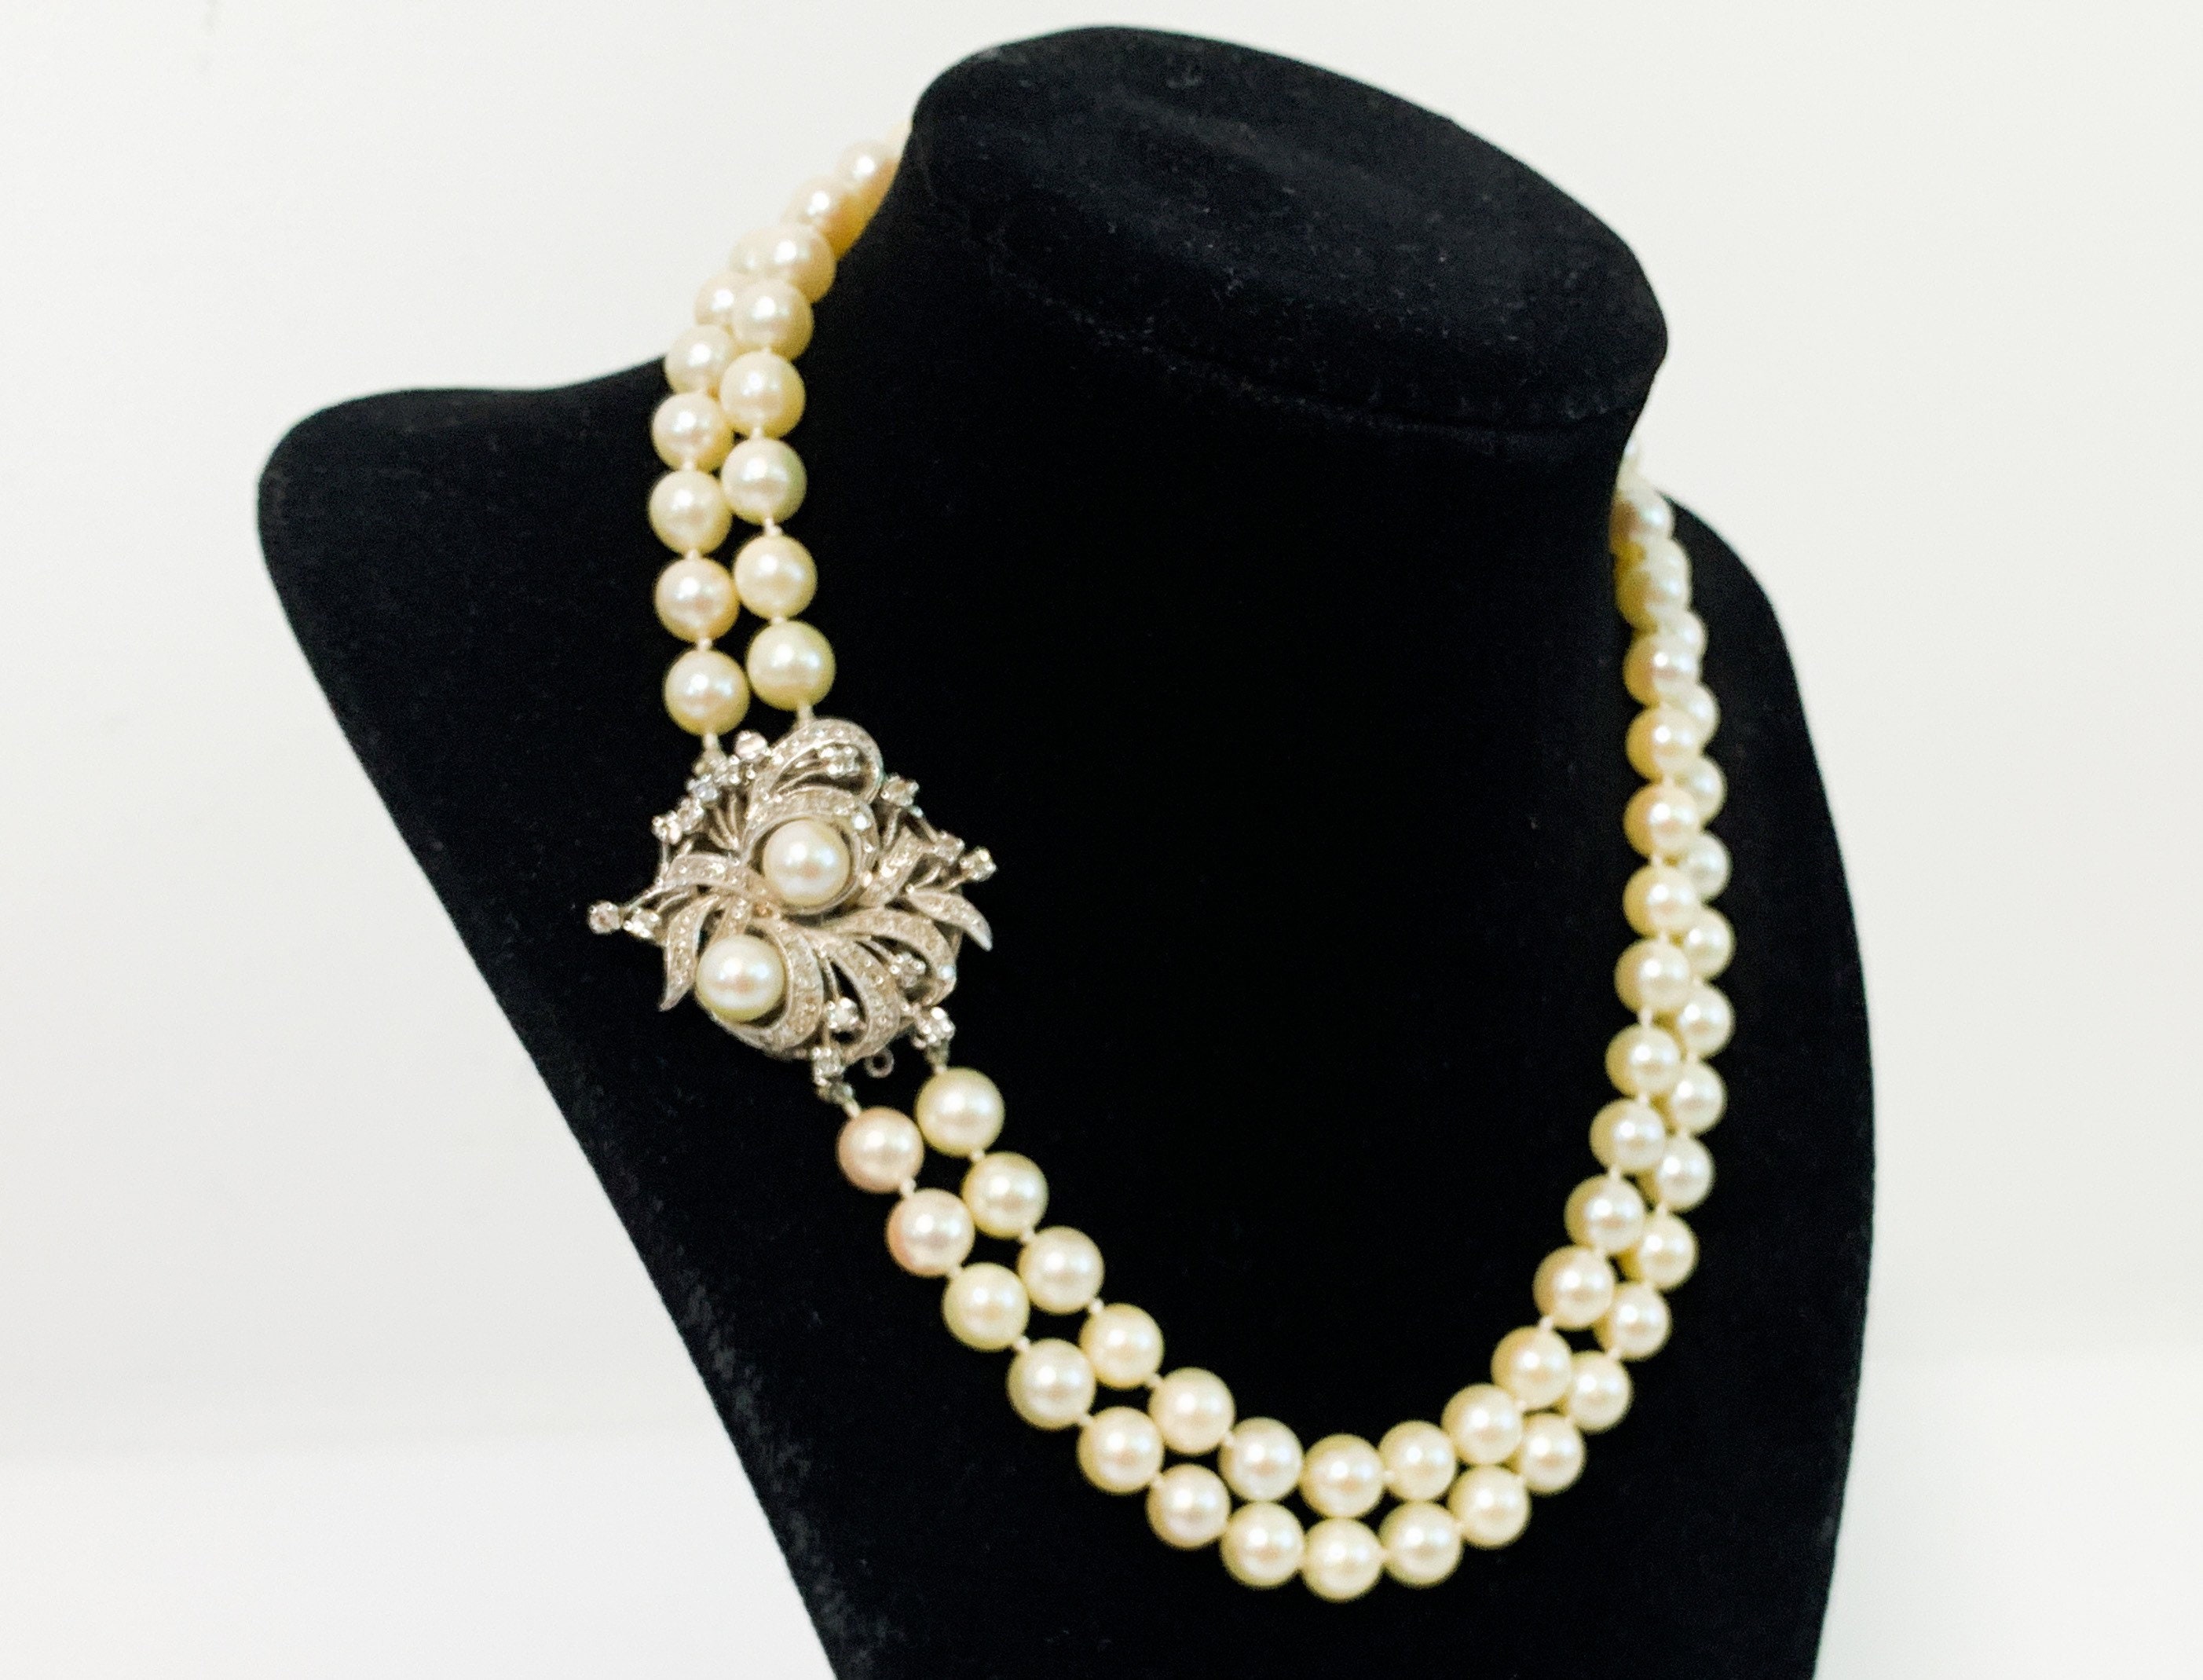 Vintage Pearl Necklace W/ 14K White Gold & Diamond Clasp Large Floral  Design Mid Century Double Strand Knotted Retro Choker W/ Appraisal 